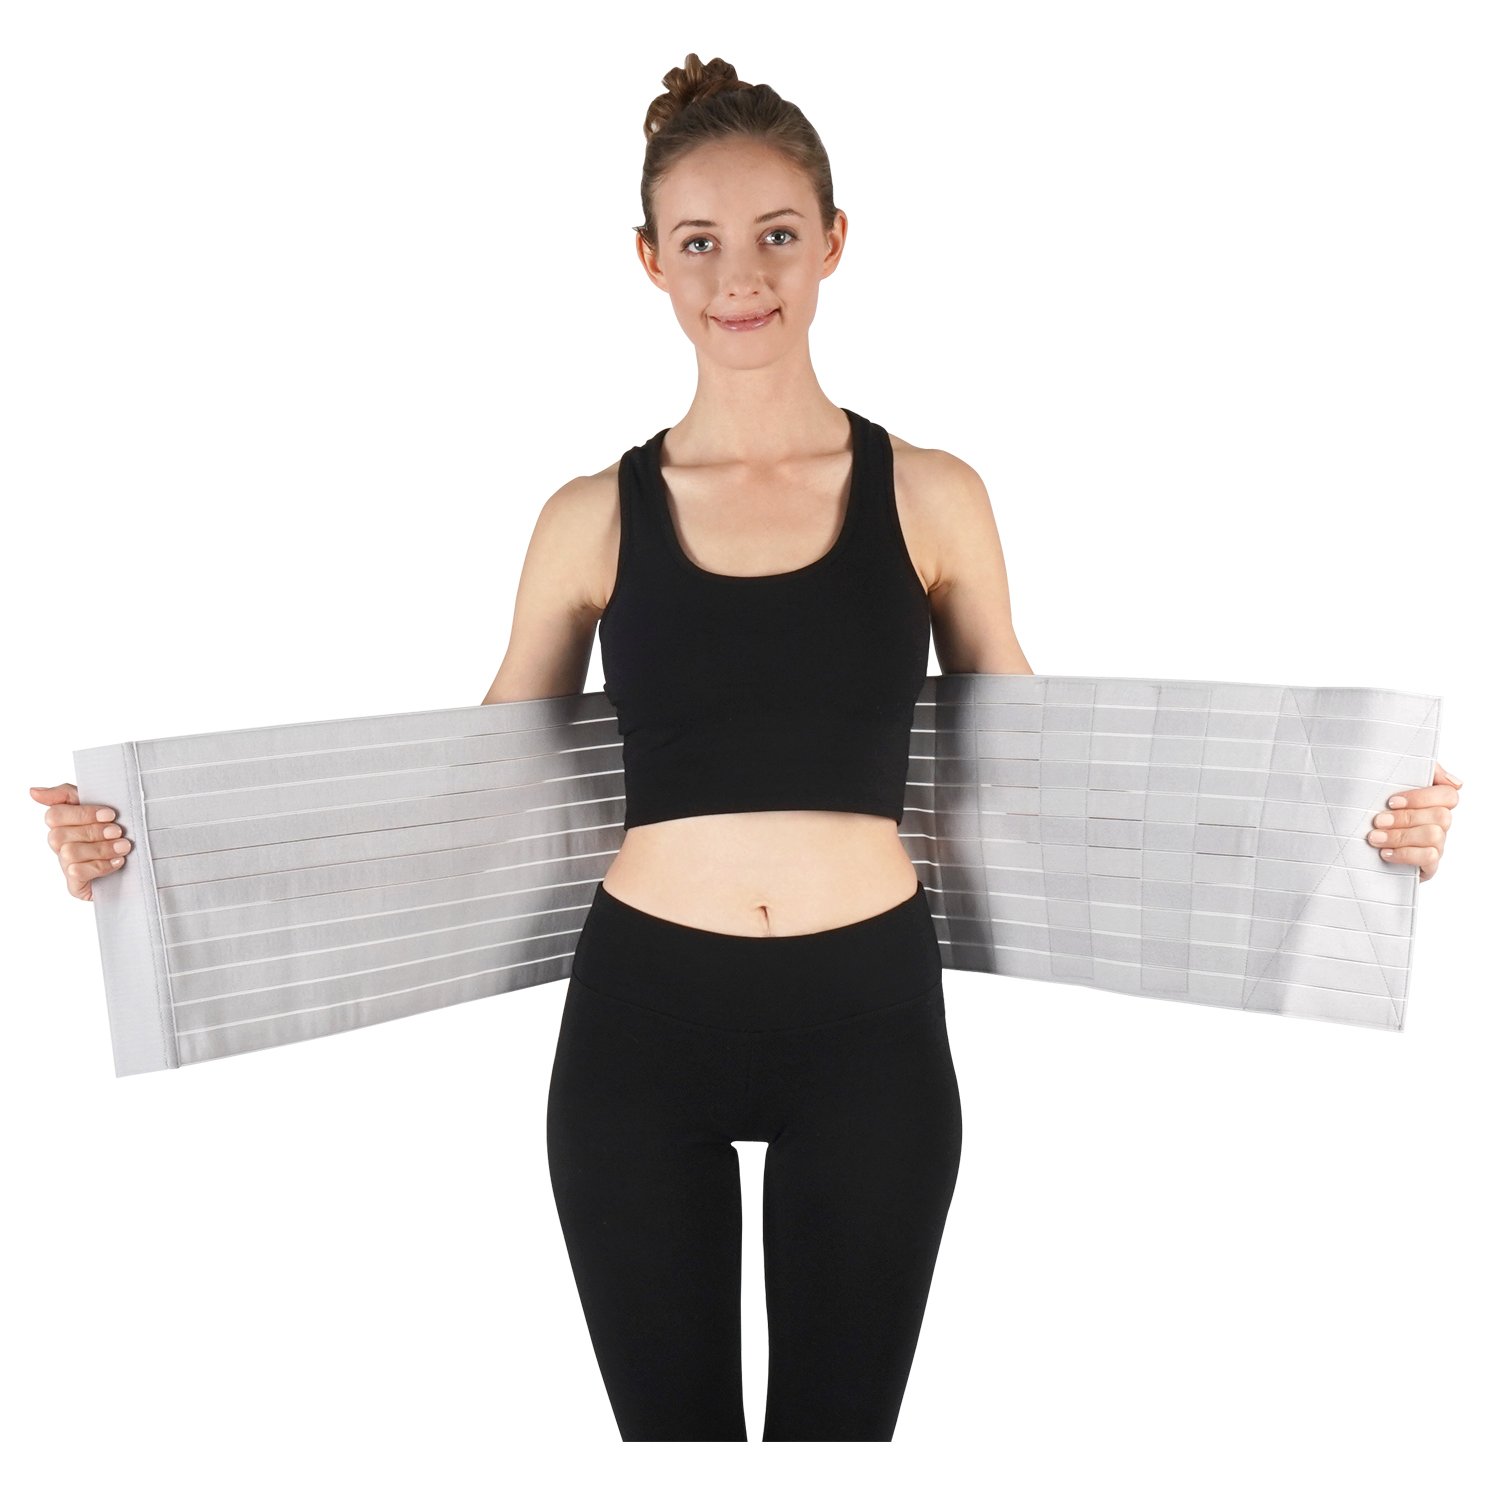 Soles Compression Abdominal Binder, Post-Surgical and Postpartum Belly Wrap, Adjustable Belly Wrap Supports Muscle & Skeletal Stability, Unisex, One Size Fits Most